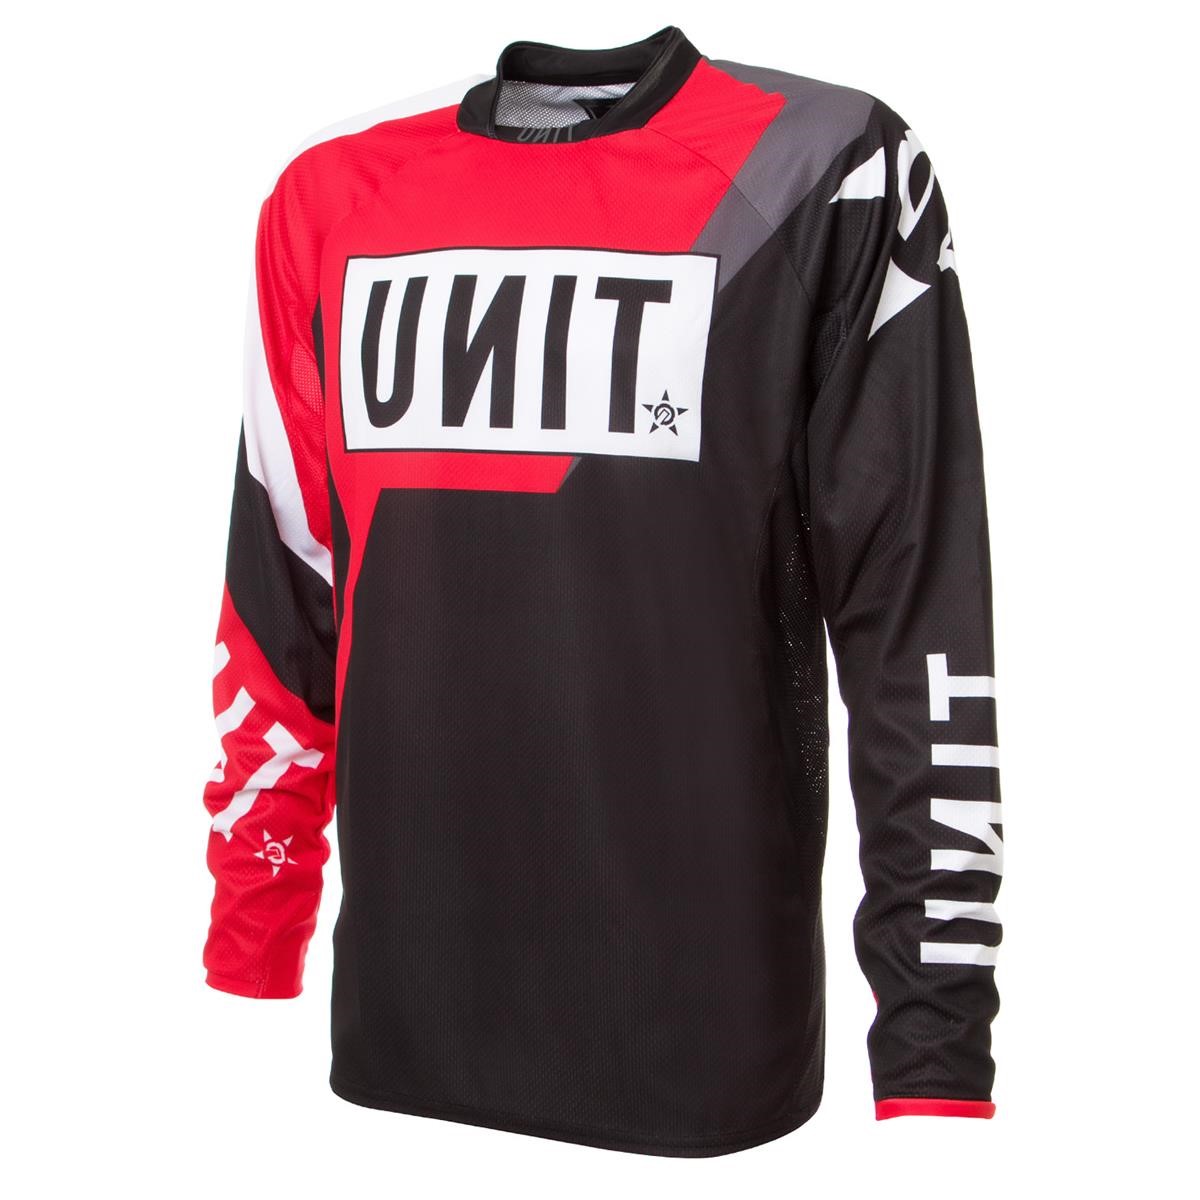 Unit Jersey Armatech Red Blood